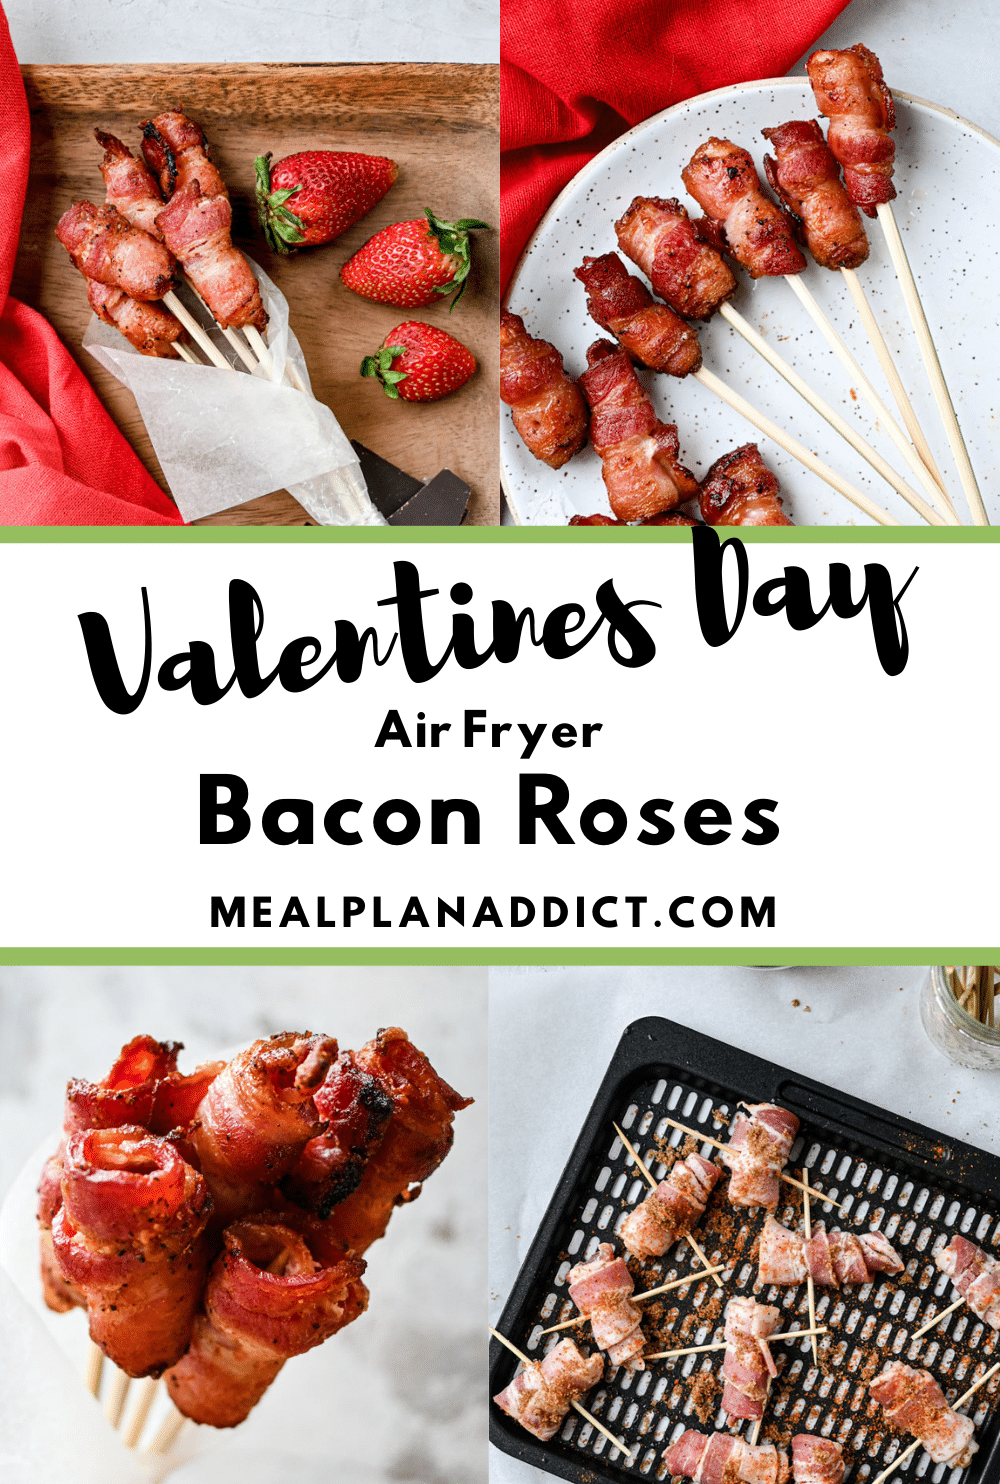 Valentines day bacon roses